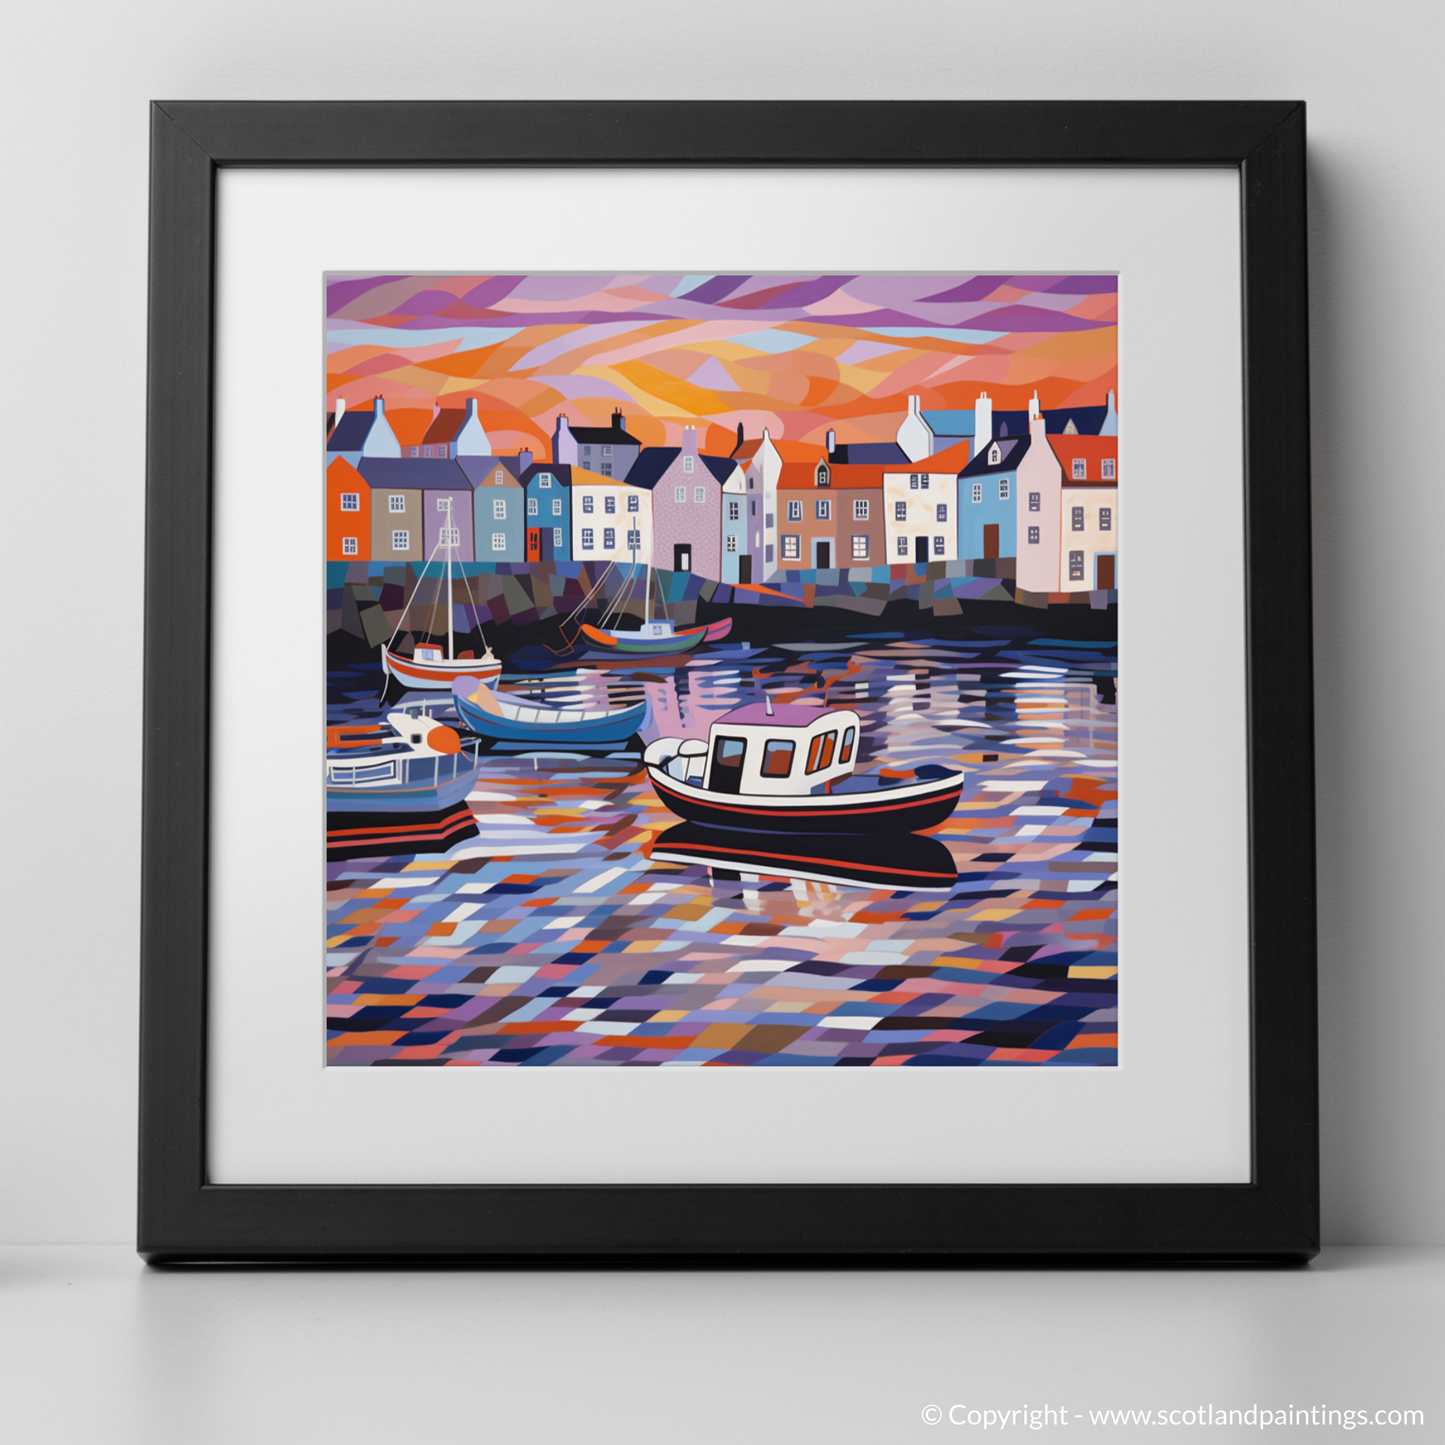 Dusk at Pittenweem Harbour: An Abstract Reverie